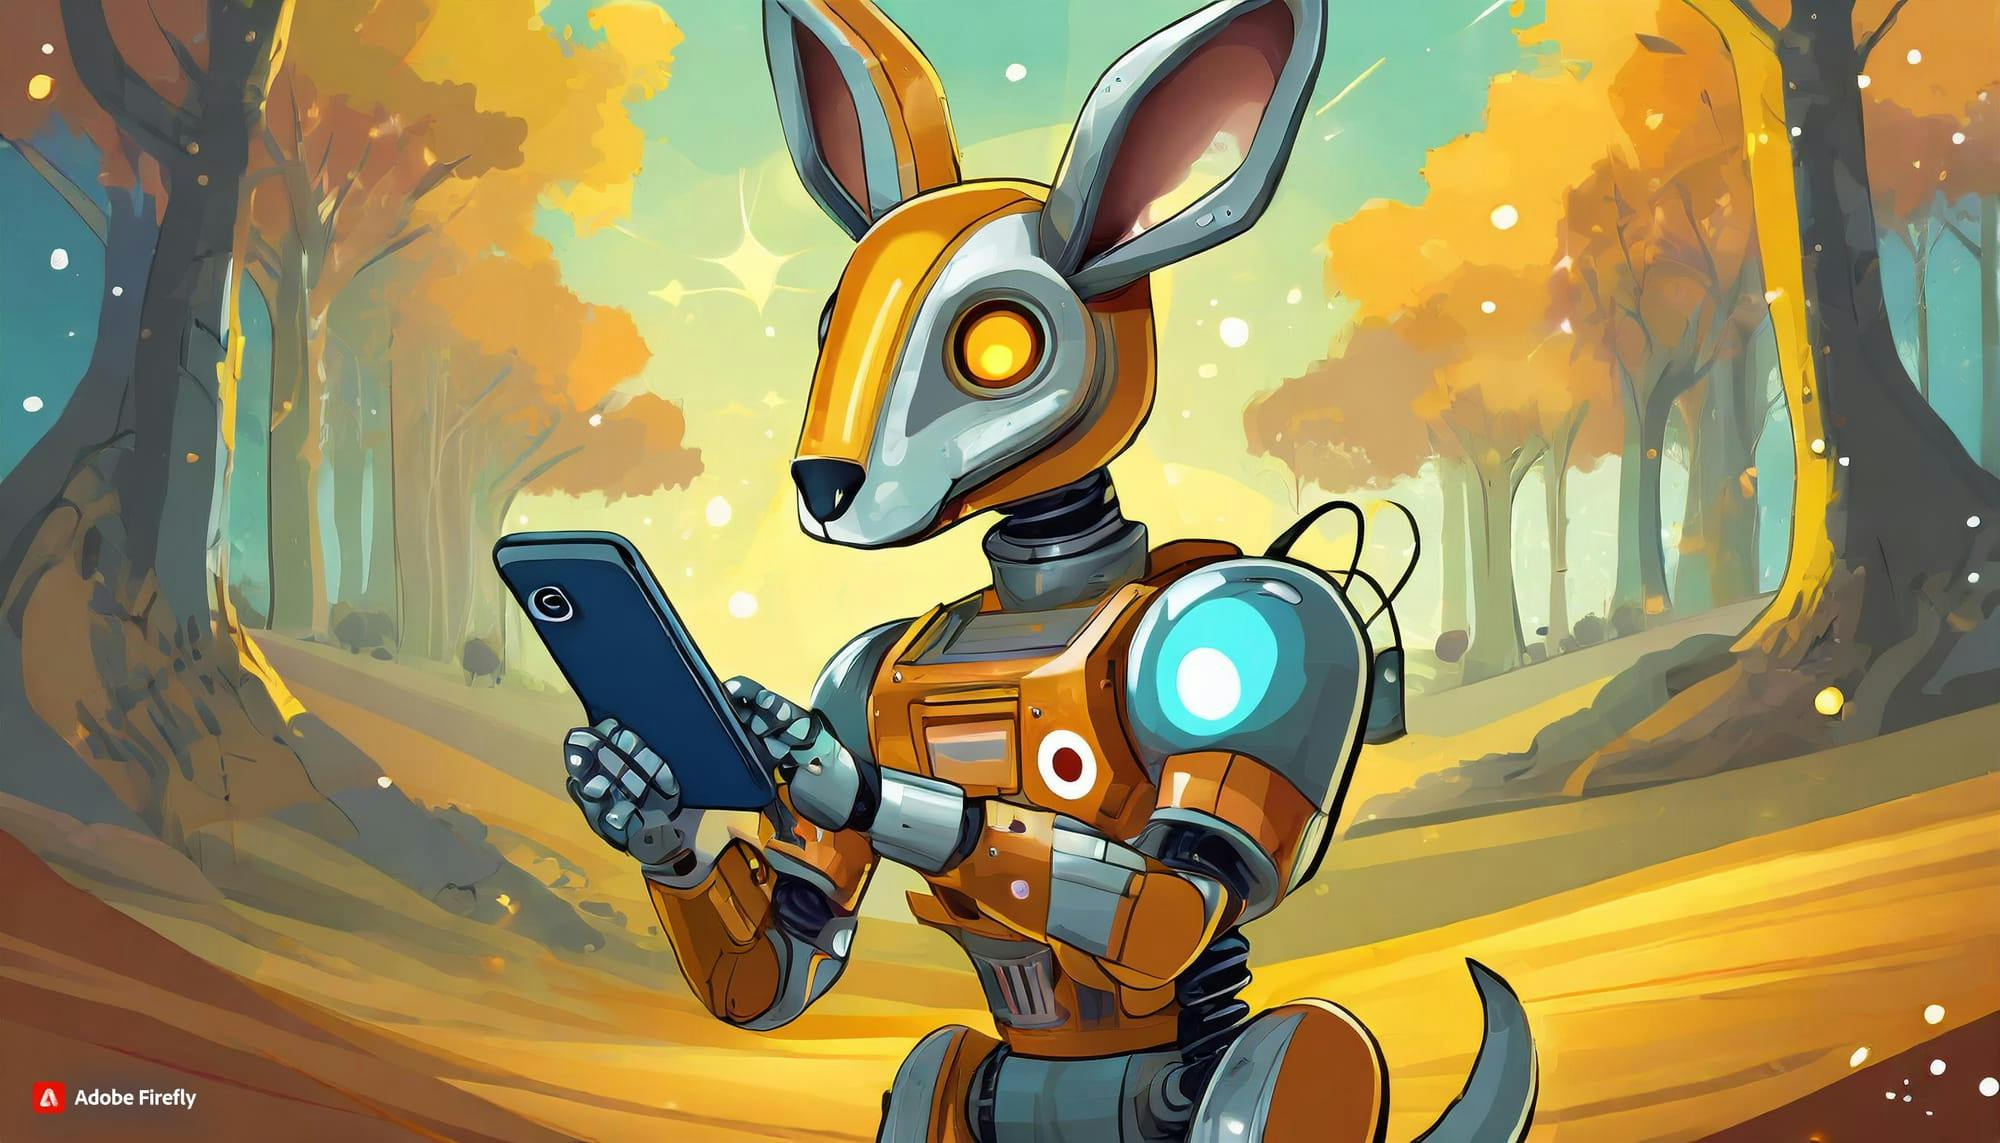 AI-generated image of a robot kangaroo checking their smartphone